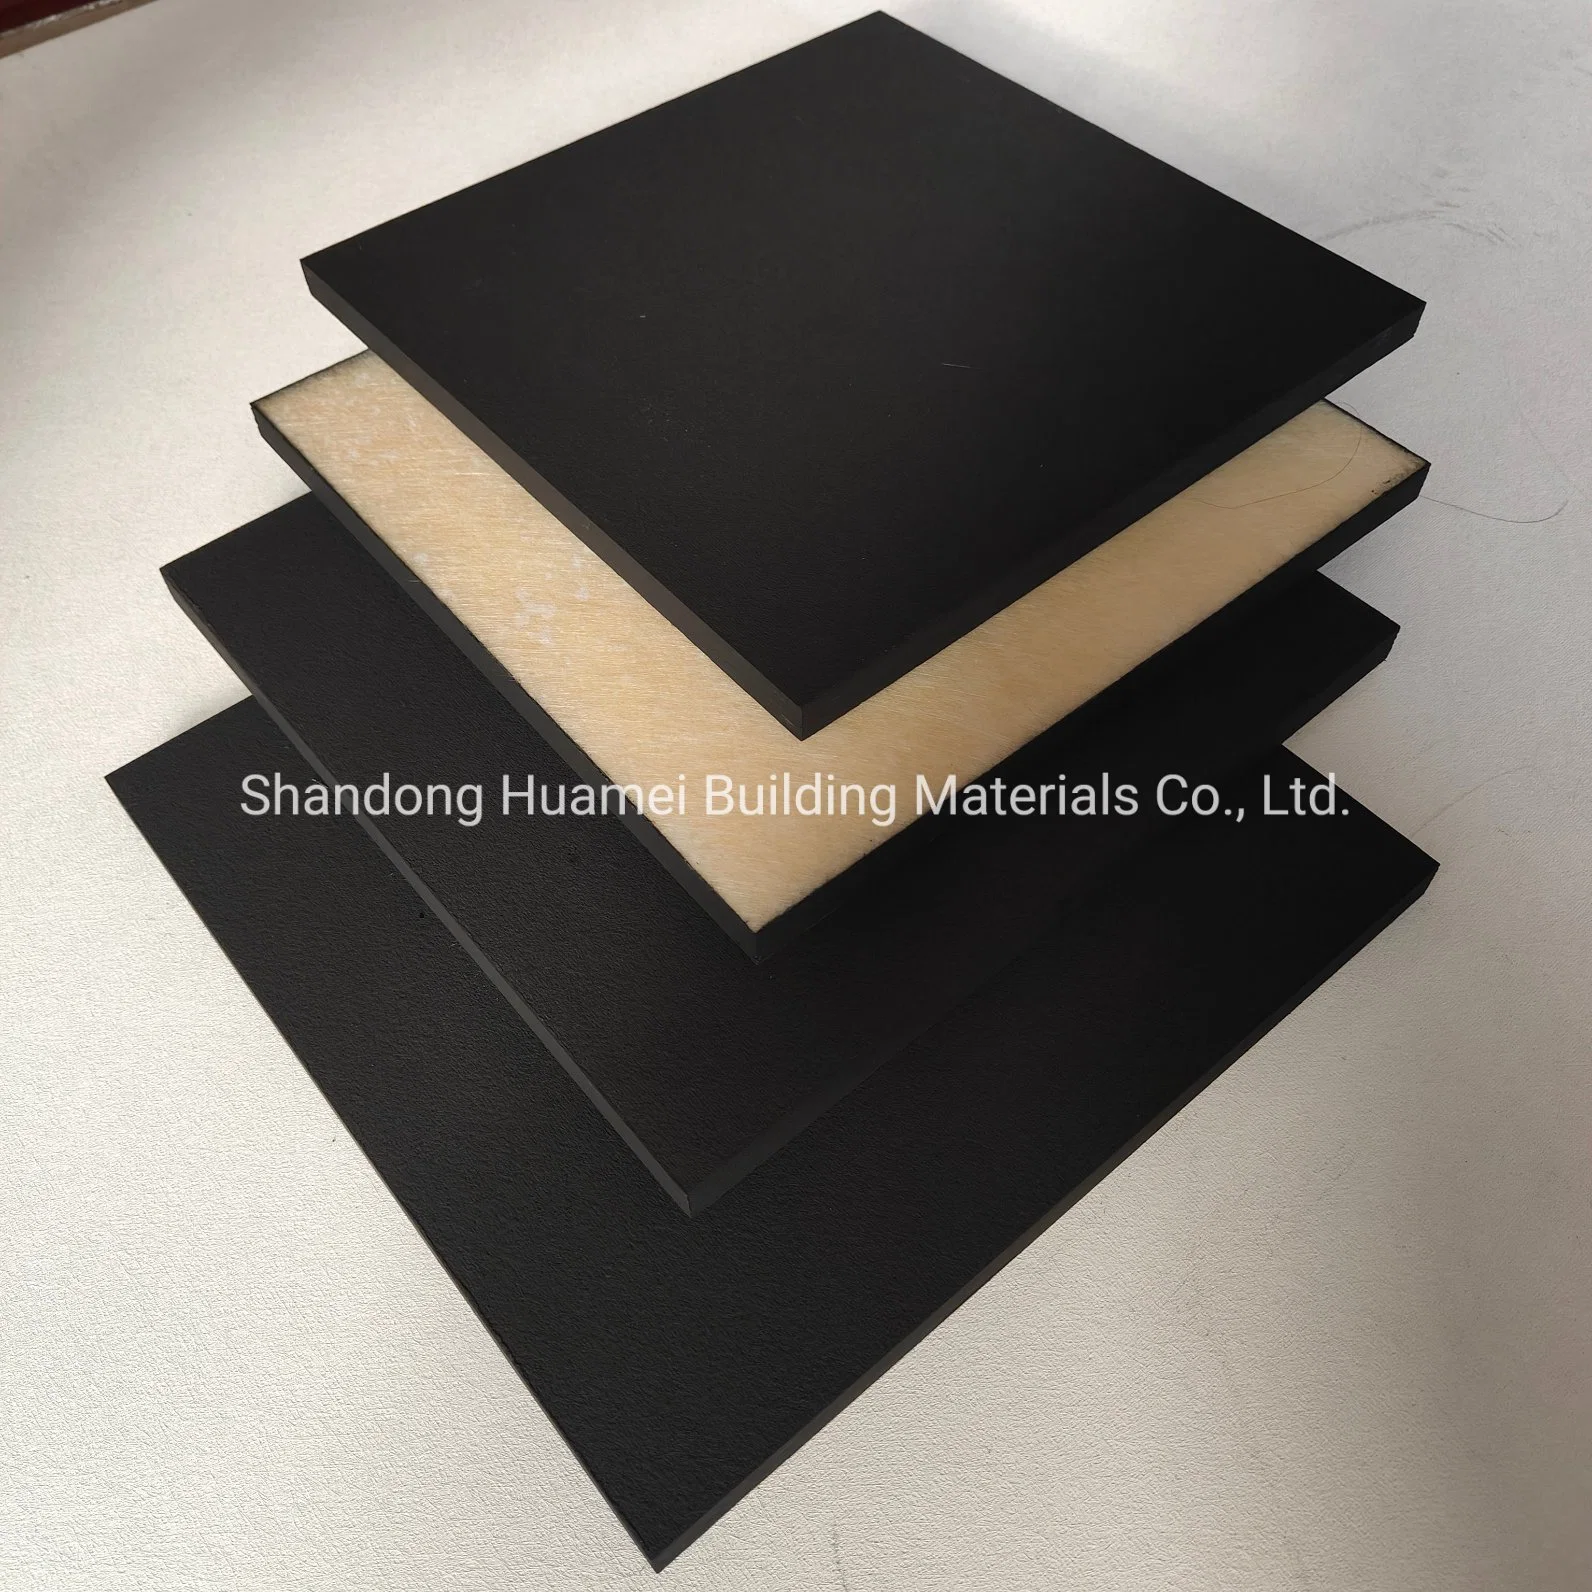 Hot Sale Fiberglass Acoustic Ceiling Tiles Square Edge Mineral Fiber Board for Ceiling and Wall